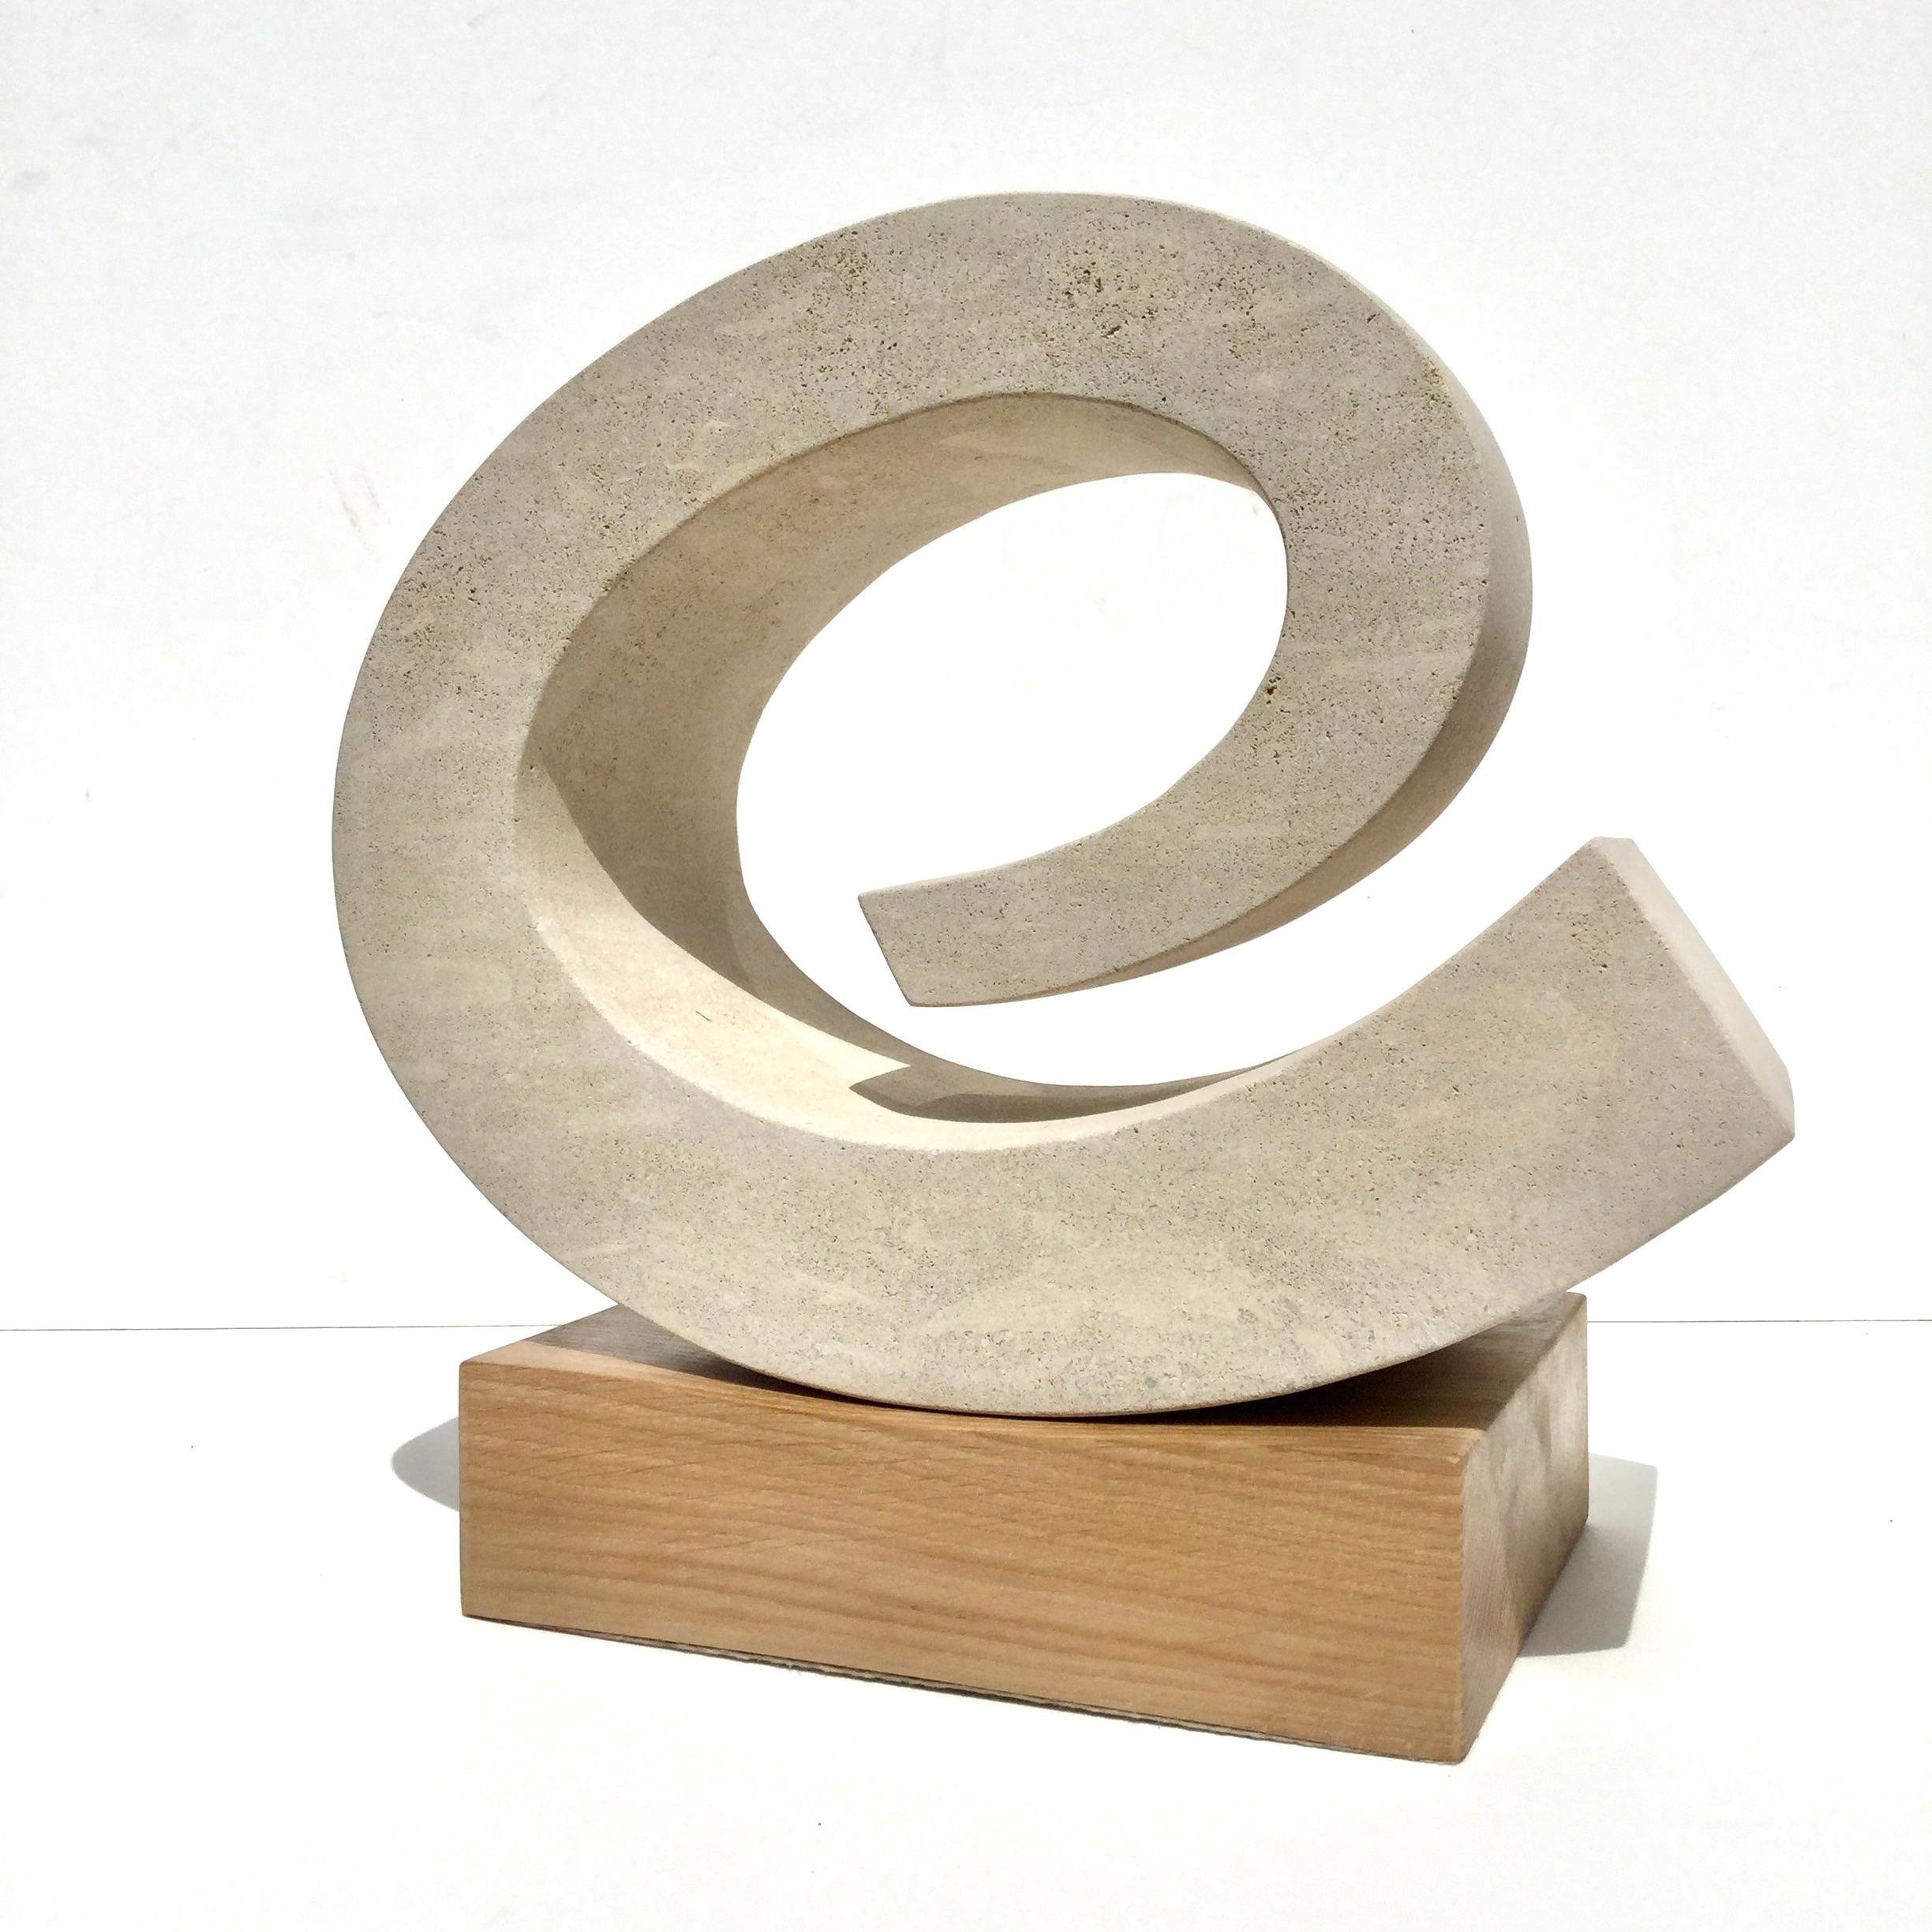 Richard Fox Abstract Sculpture - Wave III - abstract stone sculpture on oak plinth, carved, contemporary